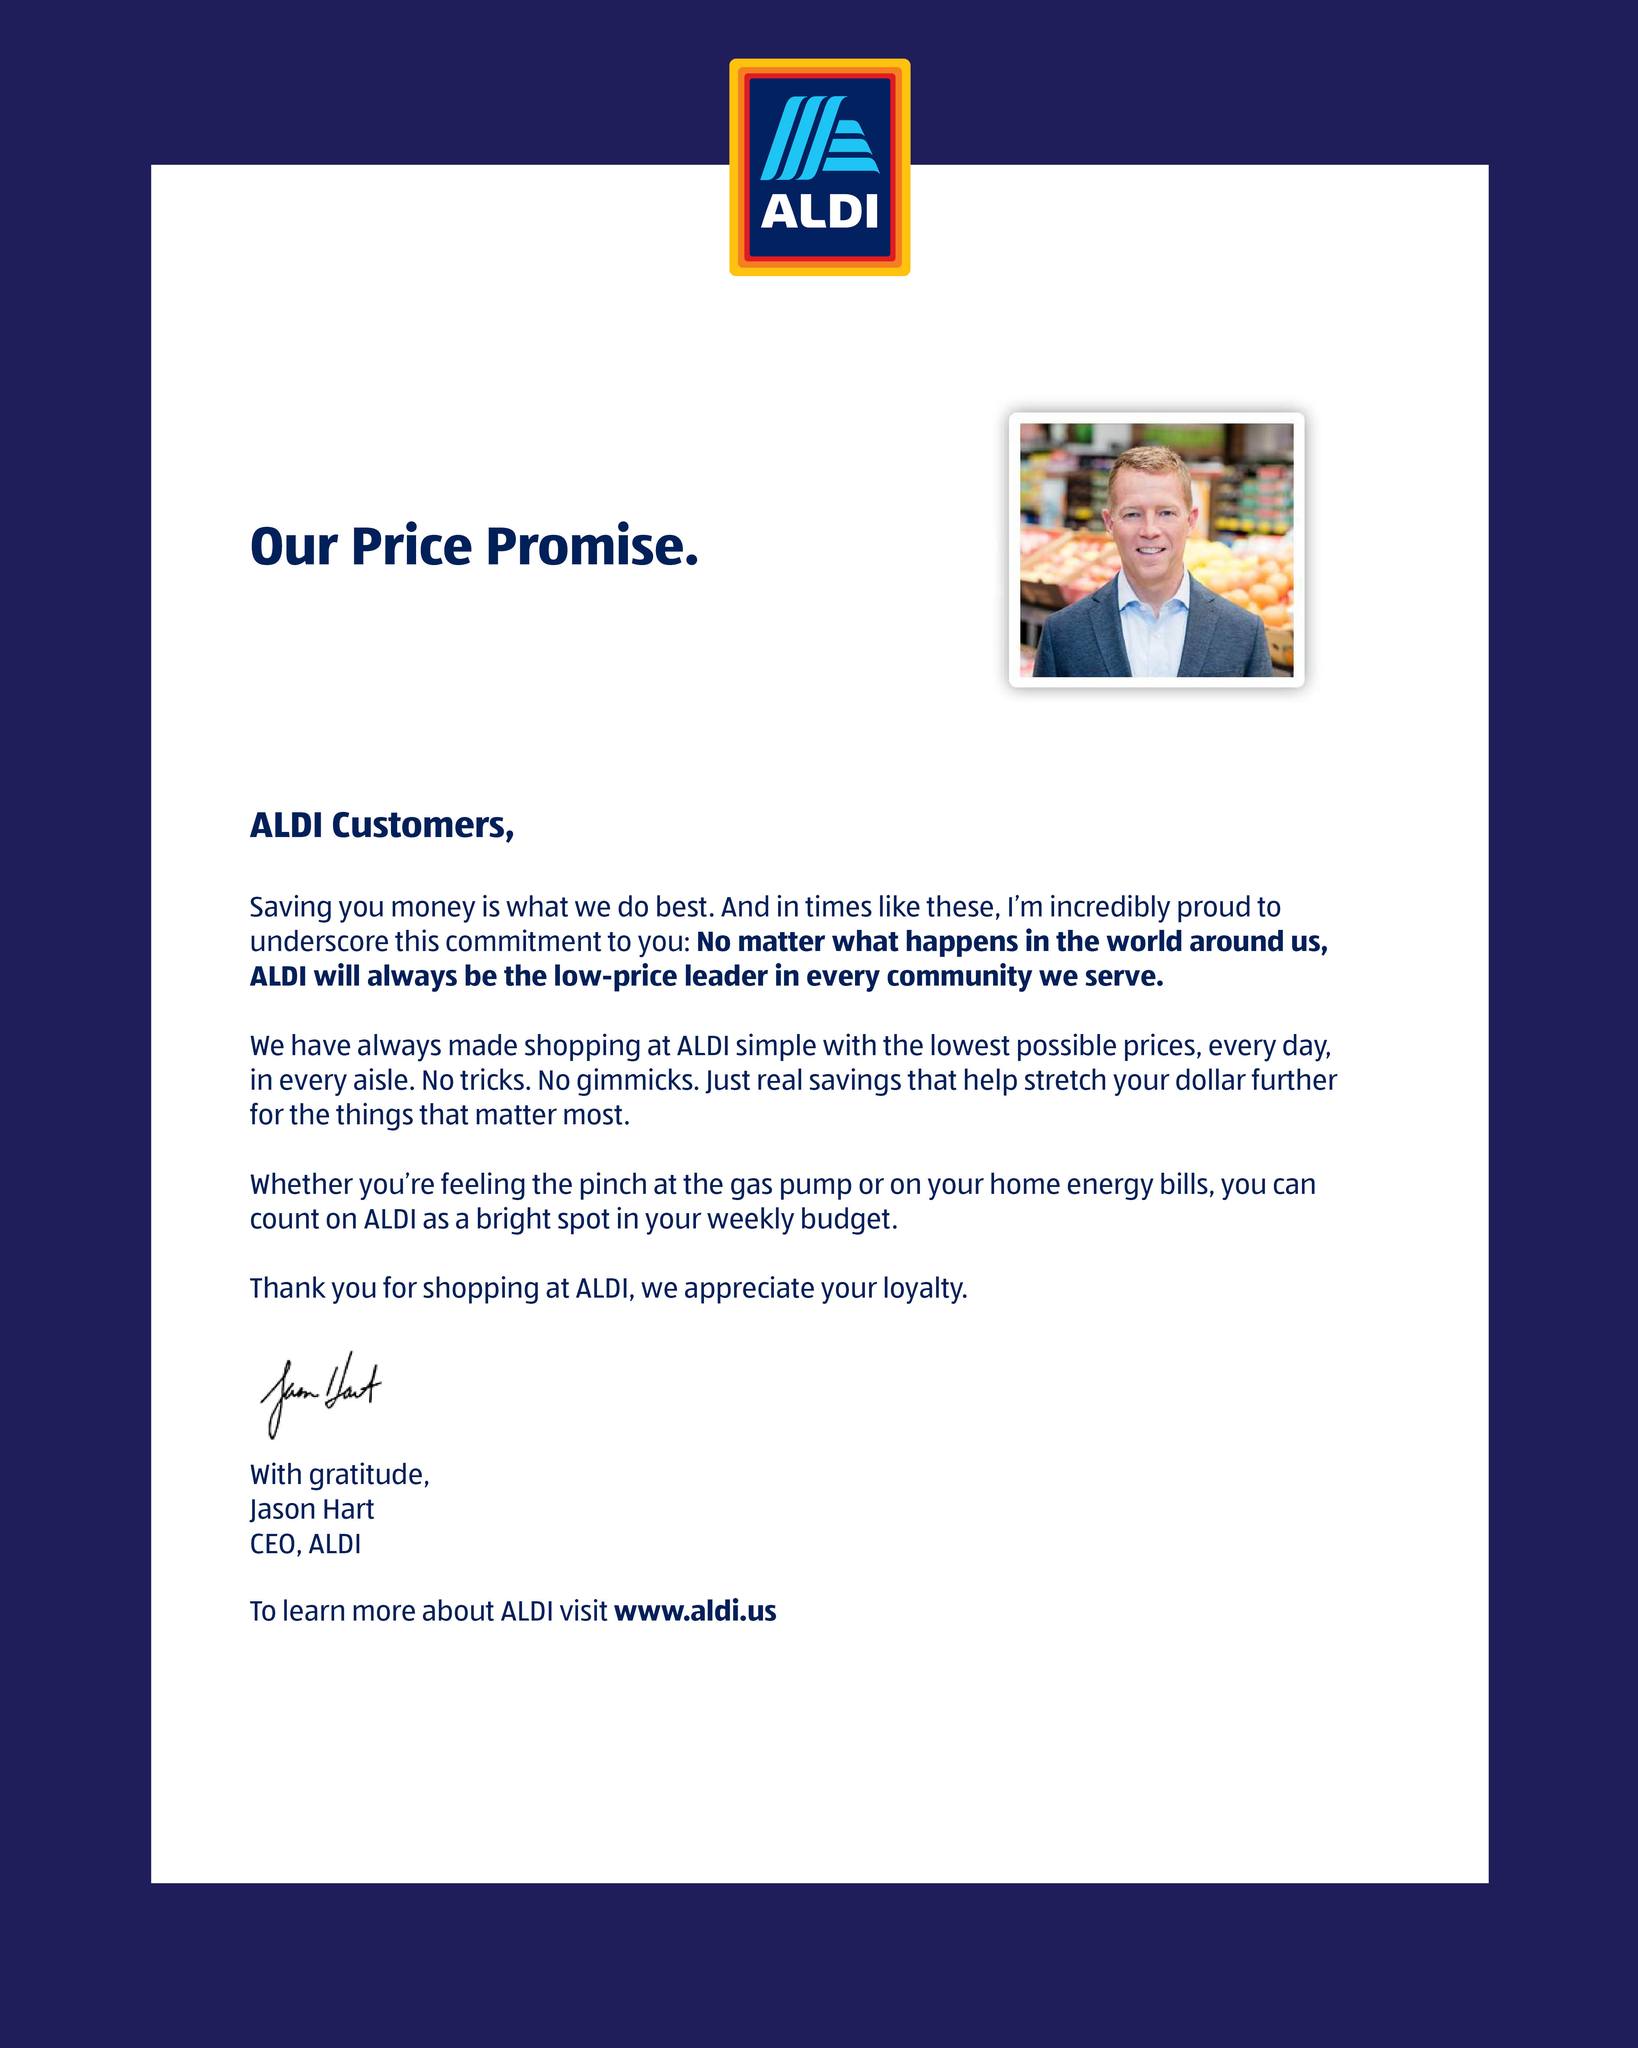 Our Price Promise